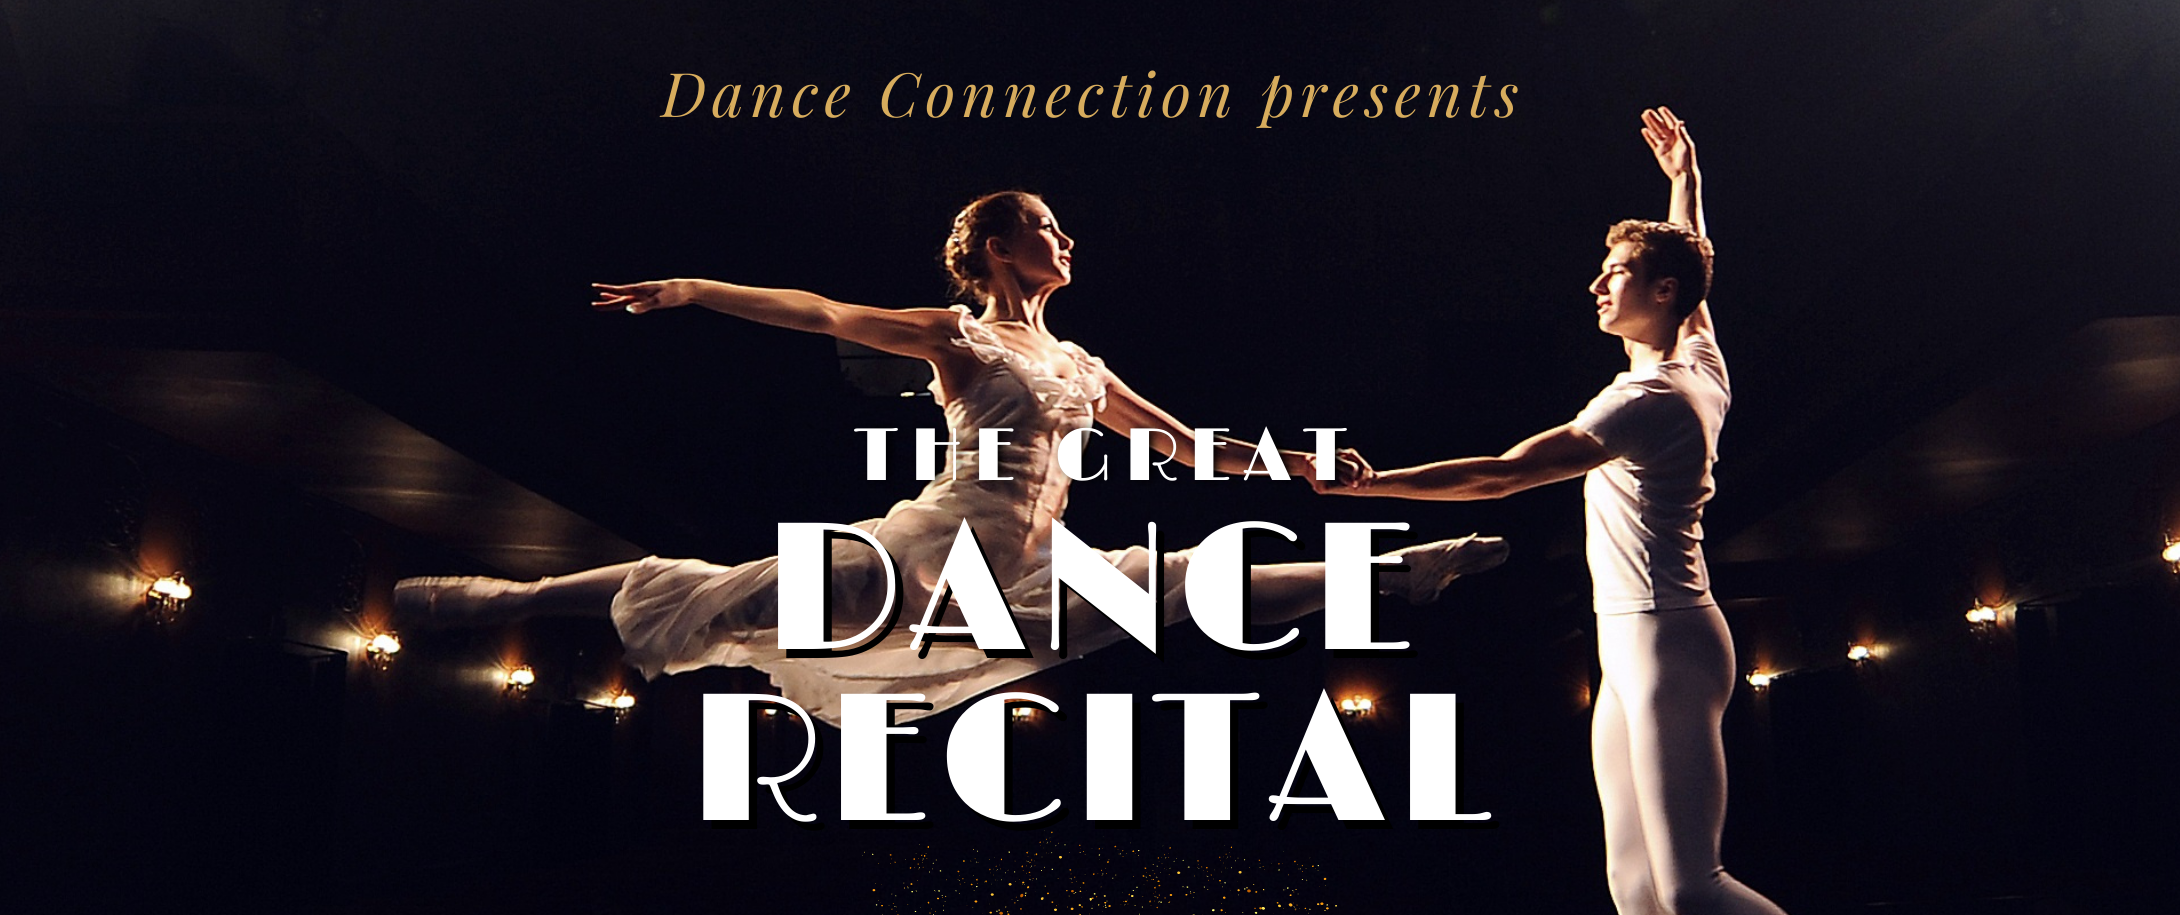 DANCE CONNECTION PRESENTS "THE GREAT DANCE RECITAL"